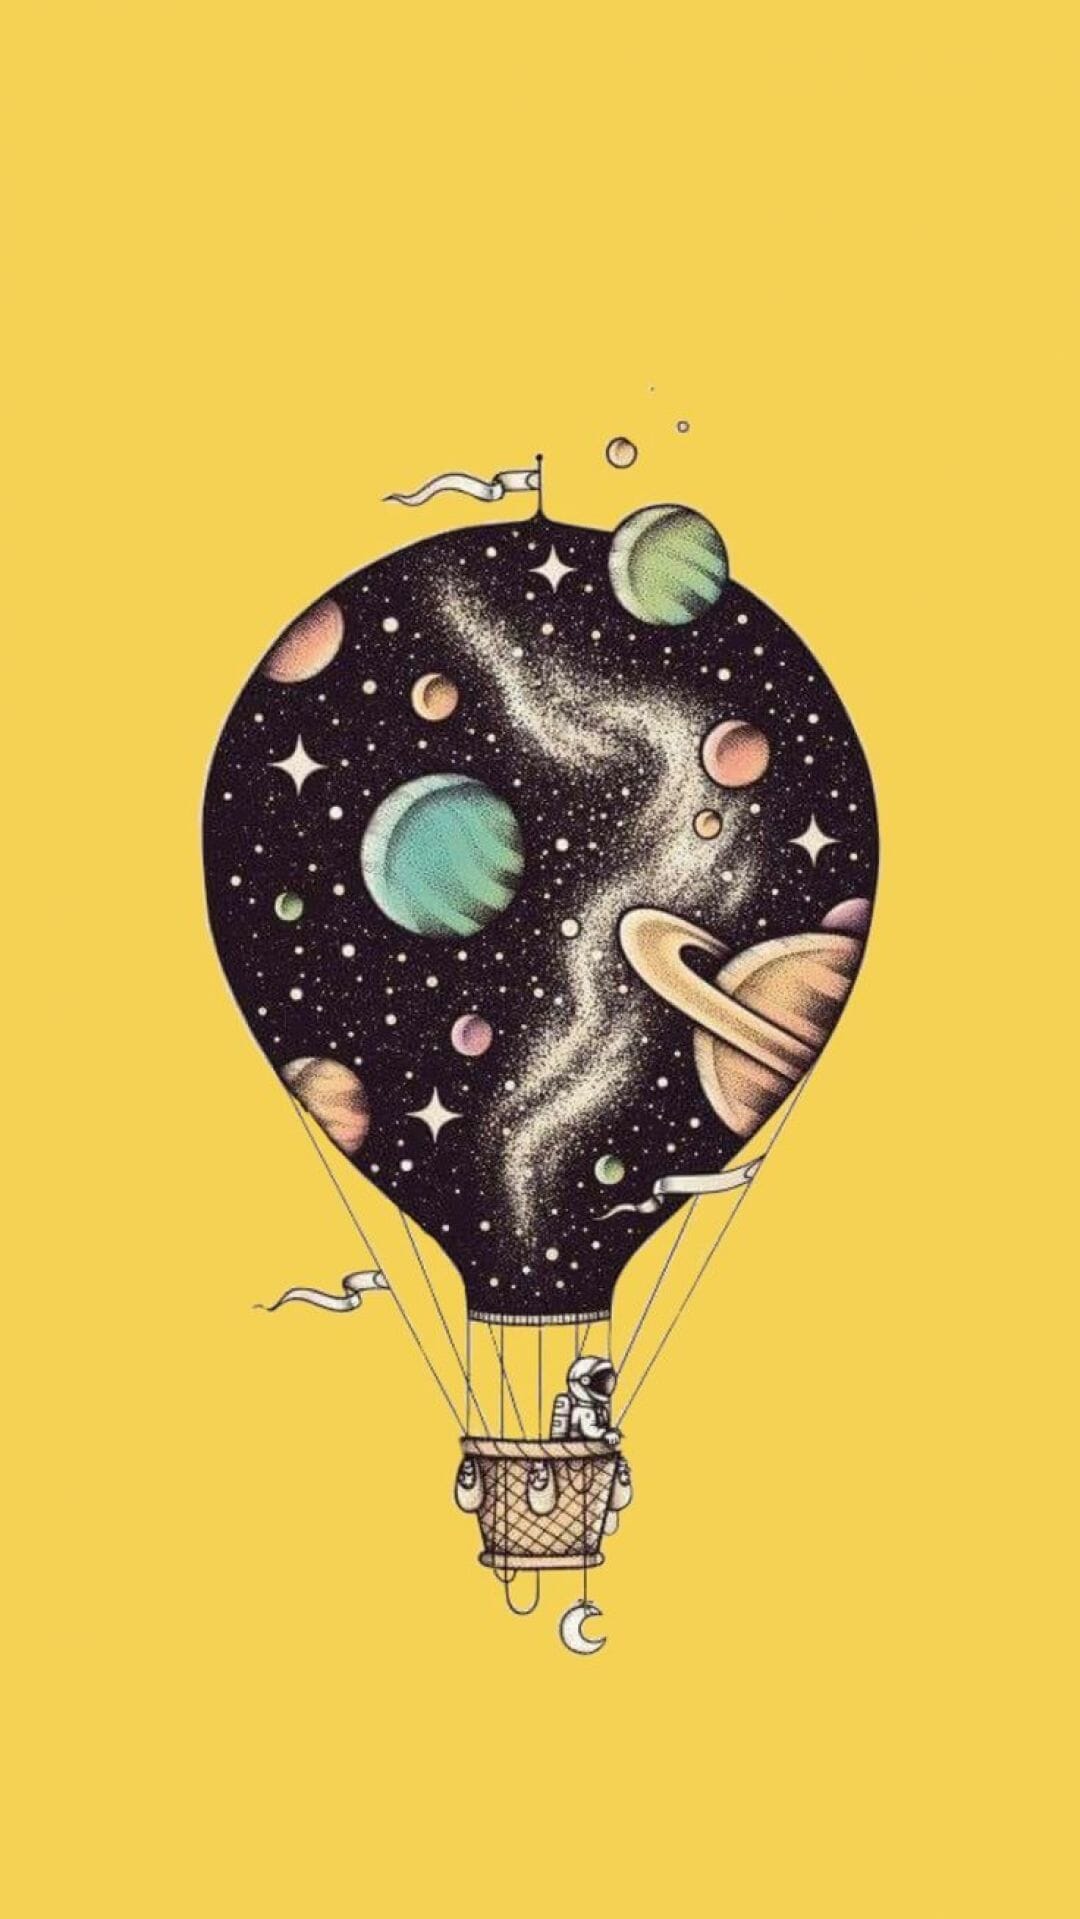 IPhone wallpaper of a hot air balloon with planets and stars - Space